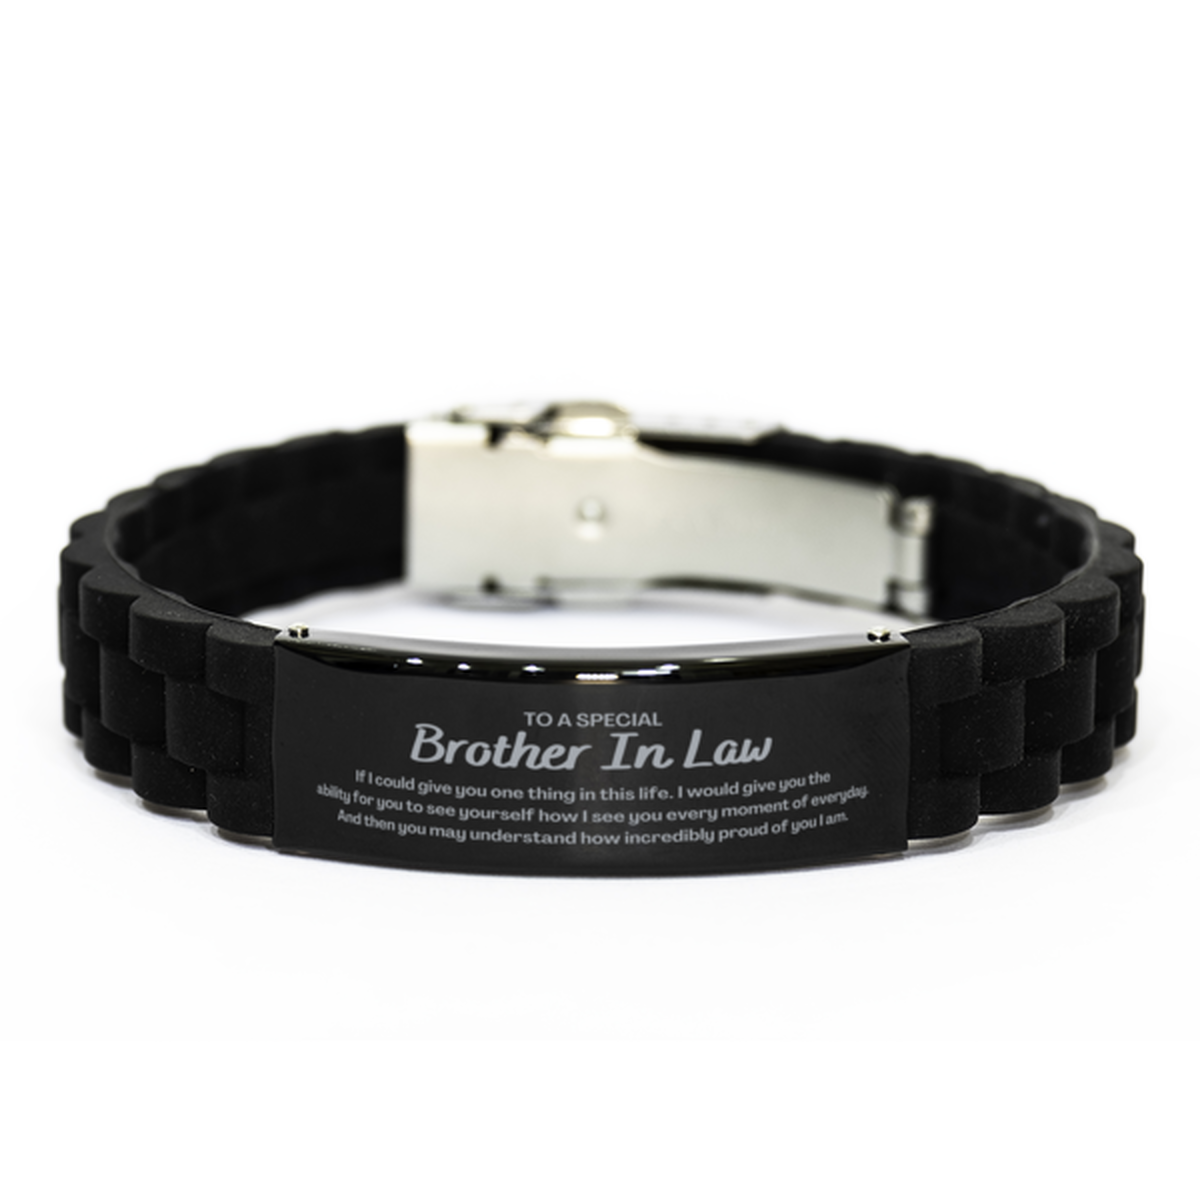 To My Brother In Law Black Glidelock Clasp Bracelet, Gifts For Brother In Law Engraved, Inspirational Gifts for Christmas Birthday, Epic Gifts for Brother In Law To A Special Brother In Law how incredibly proud of you I am